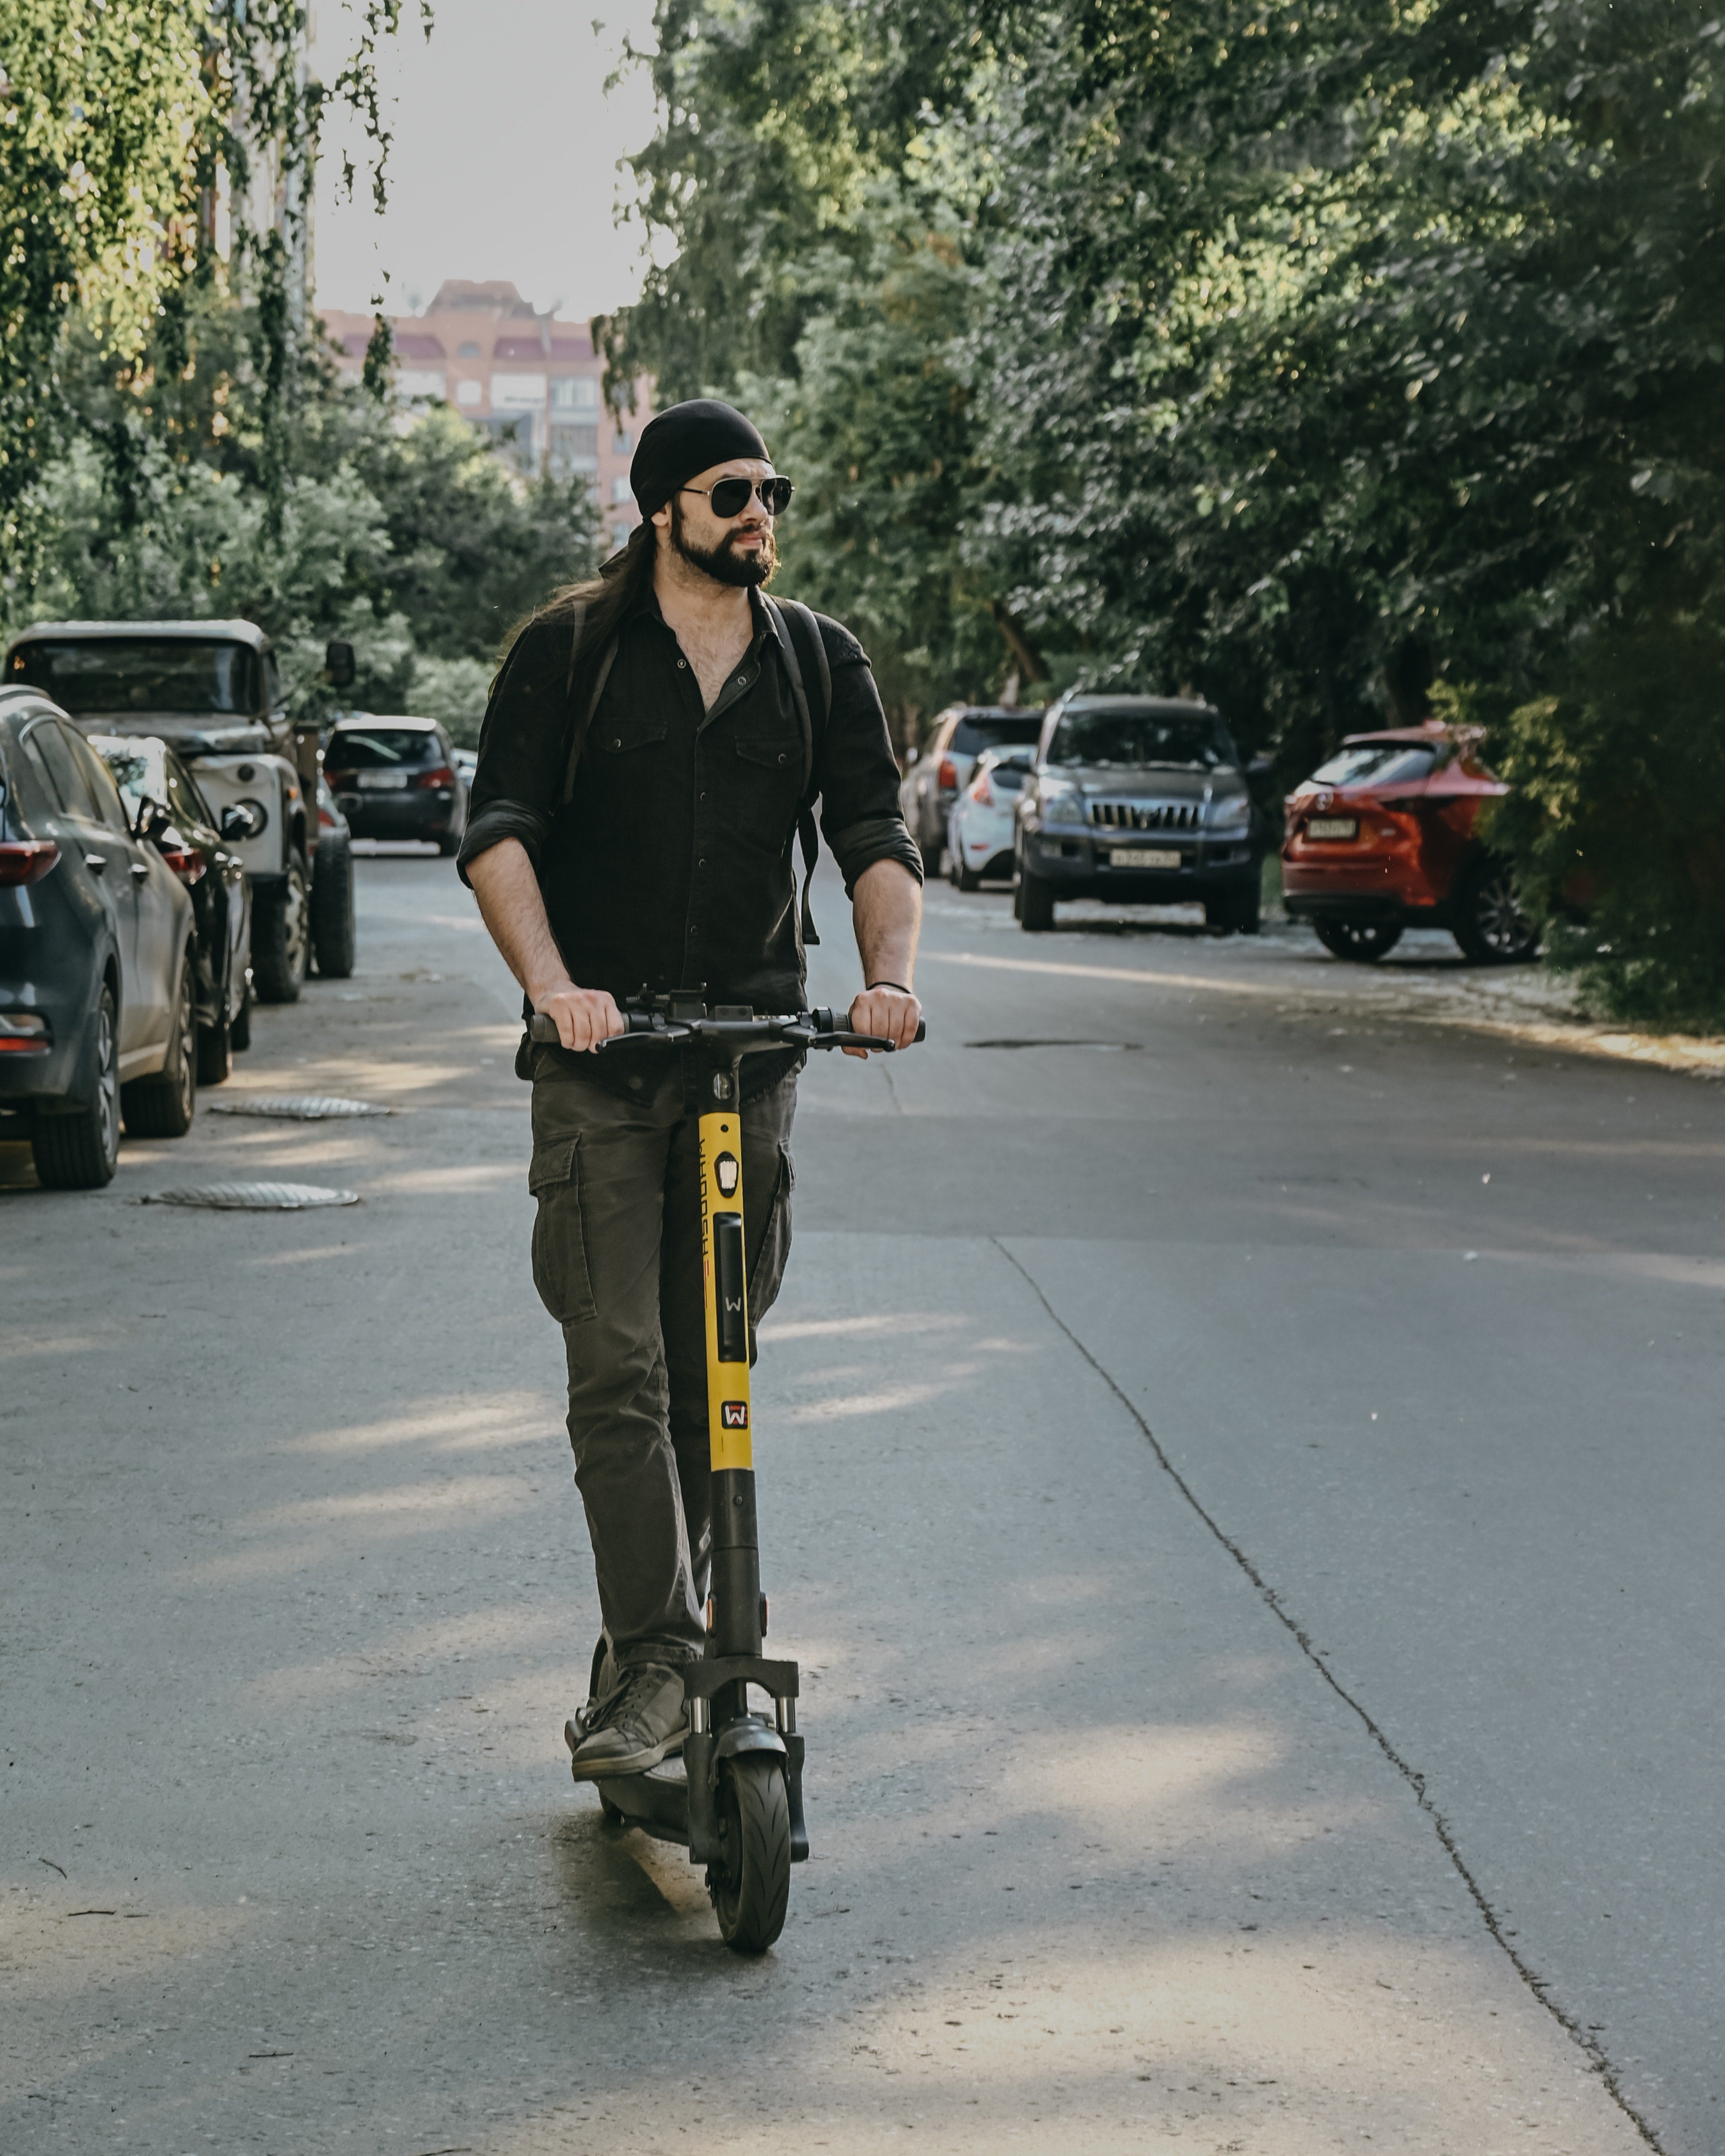 The Top 5 Benefits of E-Scooters for Commuting and Reducing Carbon Footprint